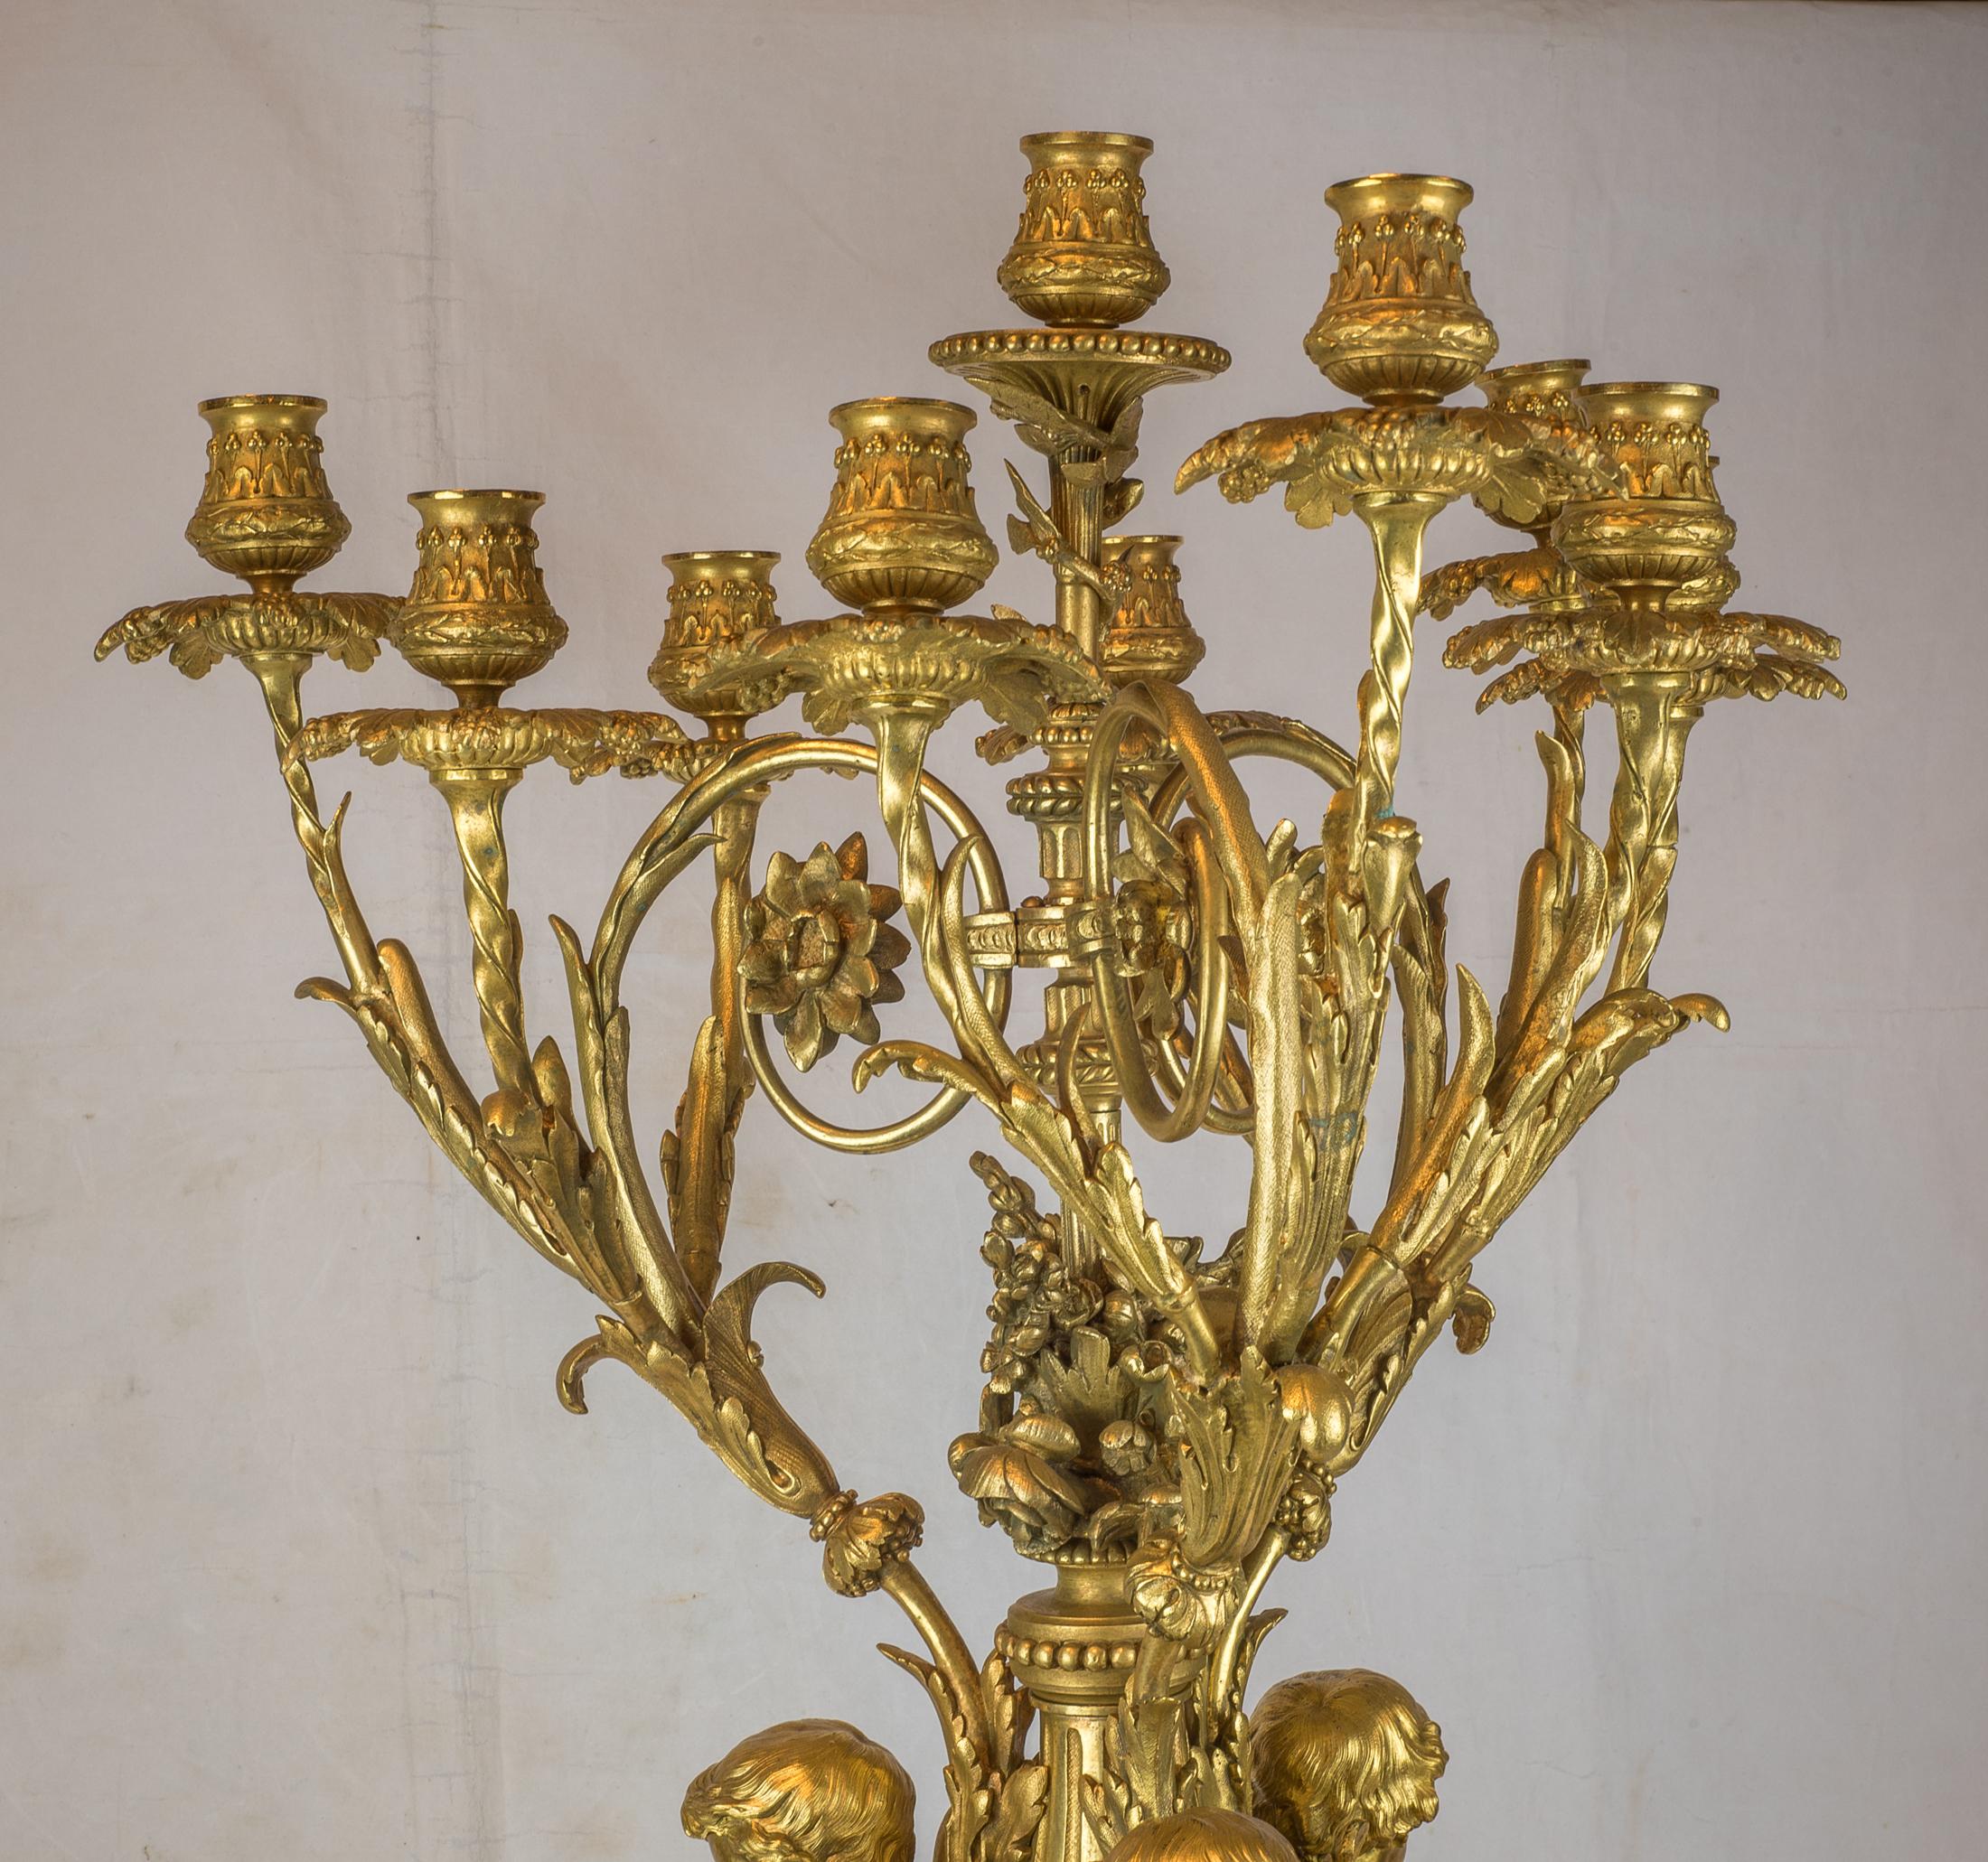 Important Pair of 19th Century French Ormolu Ten-Light Candelabra by H. Picard For Sale 3